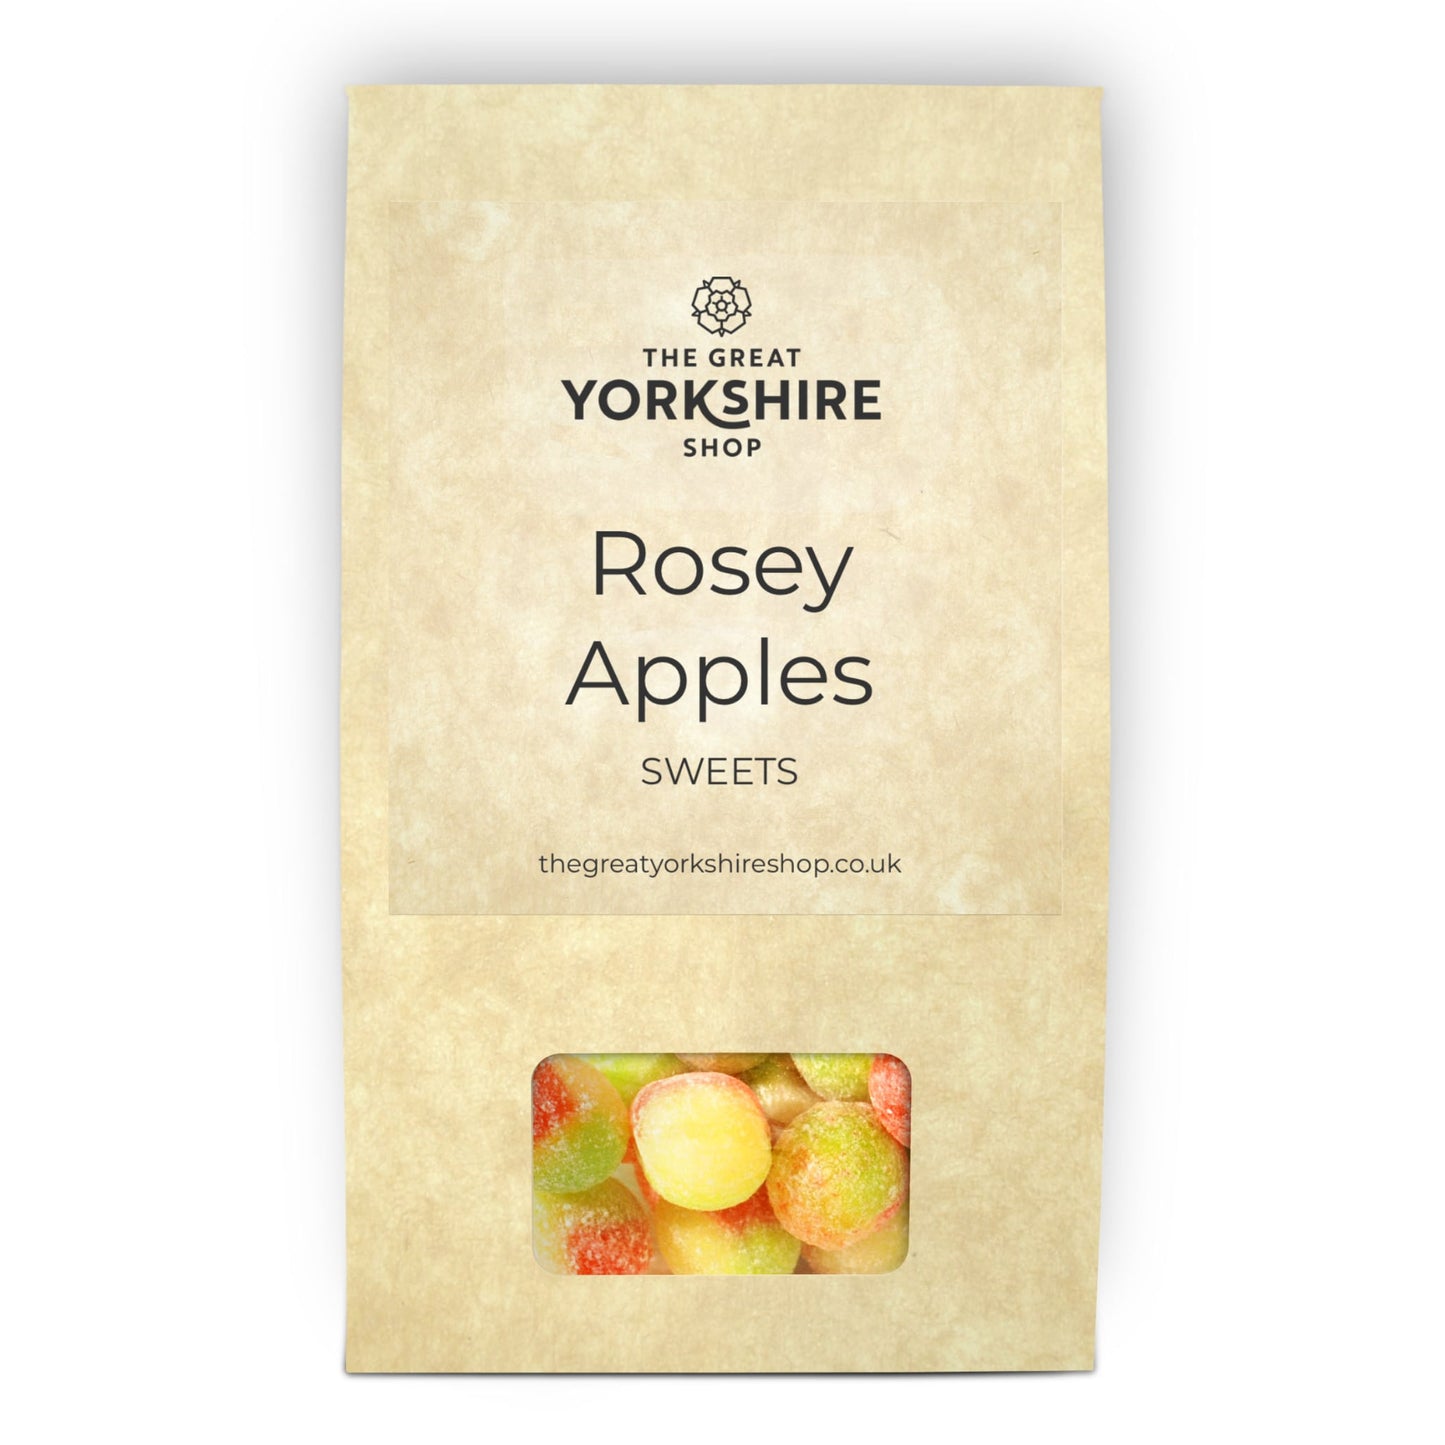 Rosey Apples Sweets - The Great Yorkshire Shop